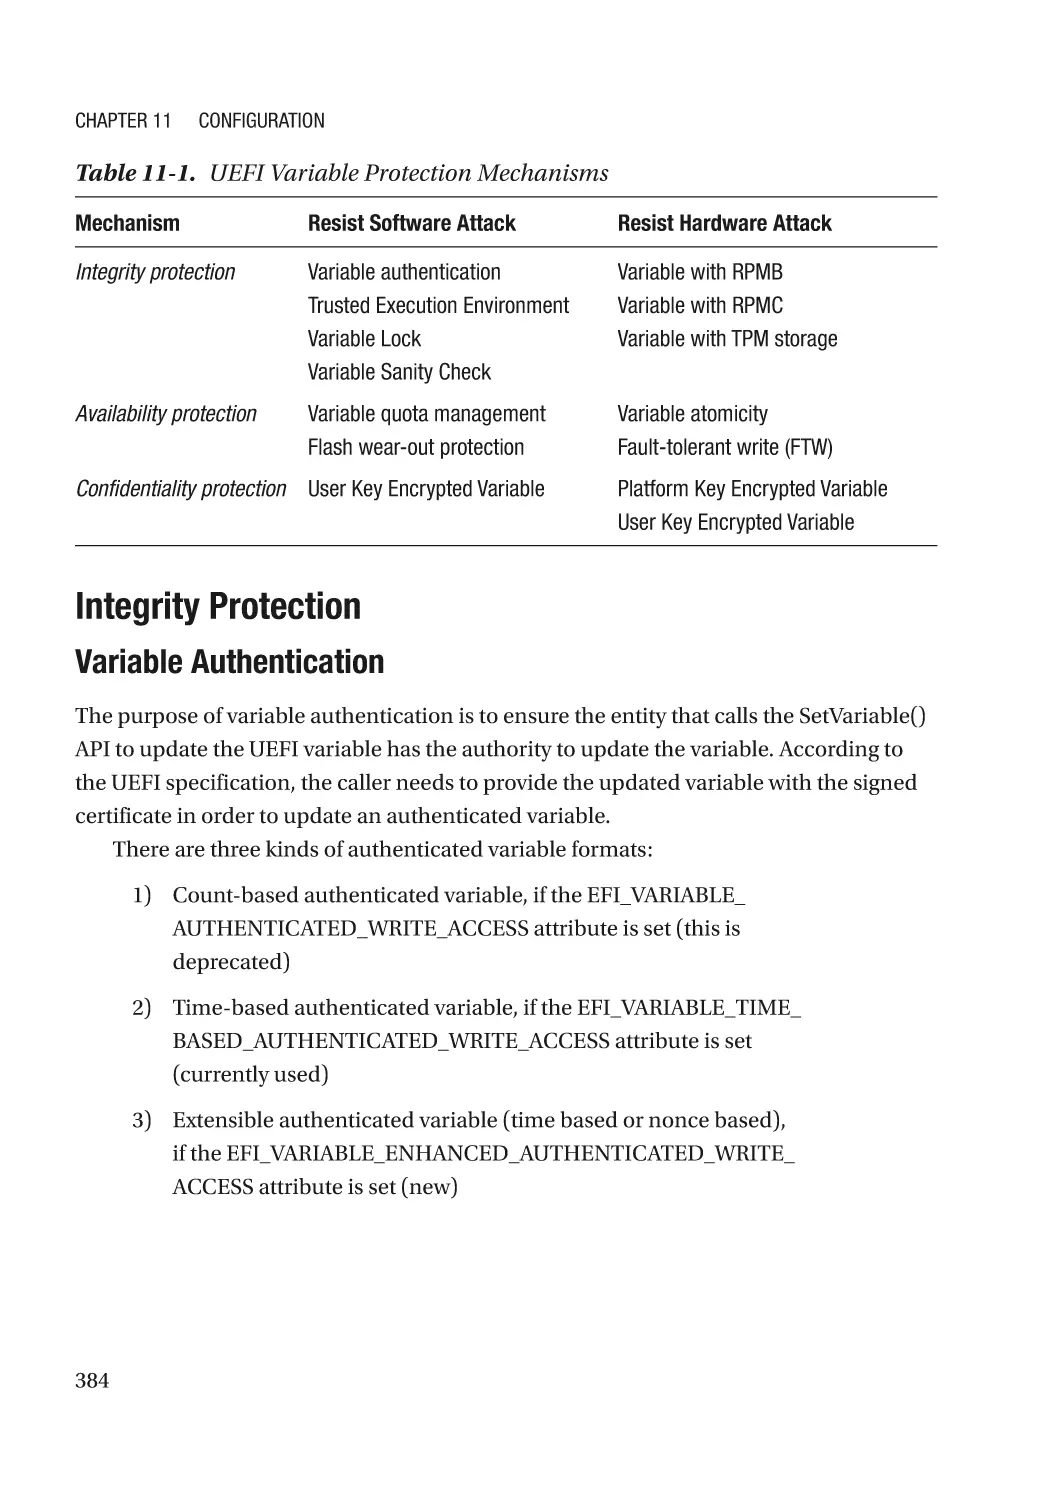 Integrity Protection
Variable Authentication